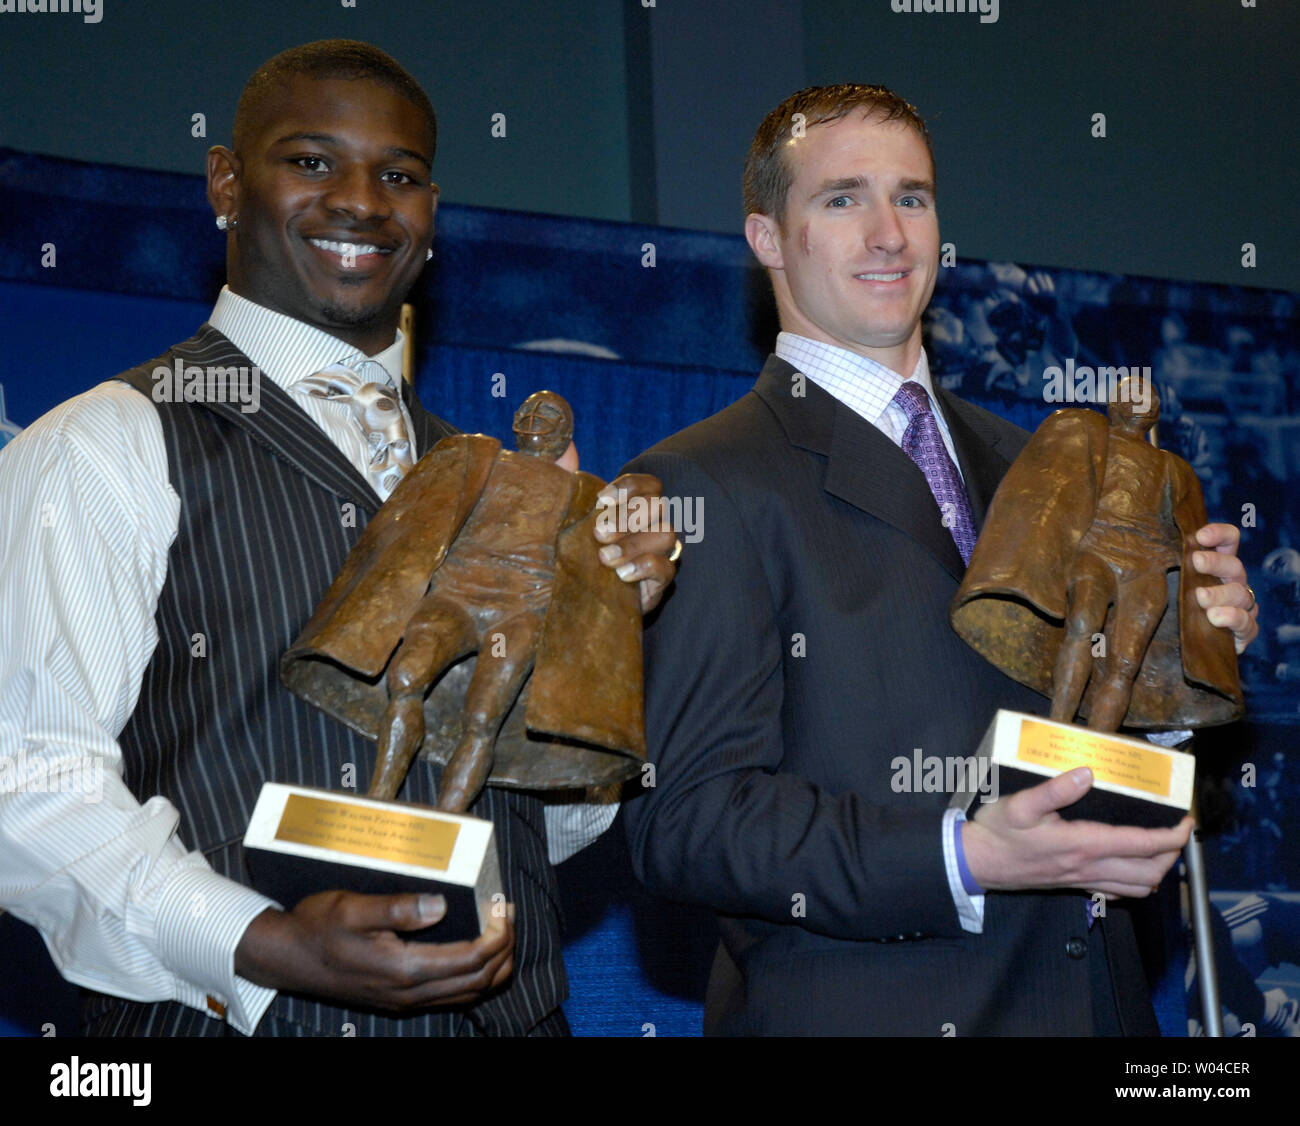 San Diego Chargers running back LaDainian Tomlinson (L) and New Orleans Saints quarter back Drew Brees pose with their Walter Peyton Man of the Year awards during the week of Super Bowl XLI in South Beach, Florida, on February 1, 2007.    (UPI Photo/Marino-Cantrell) Stock Photo